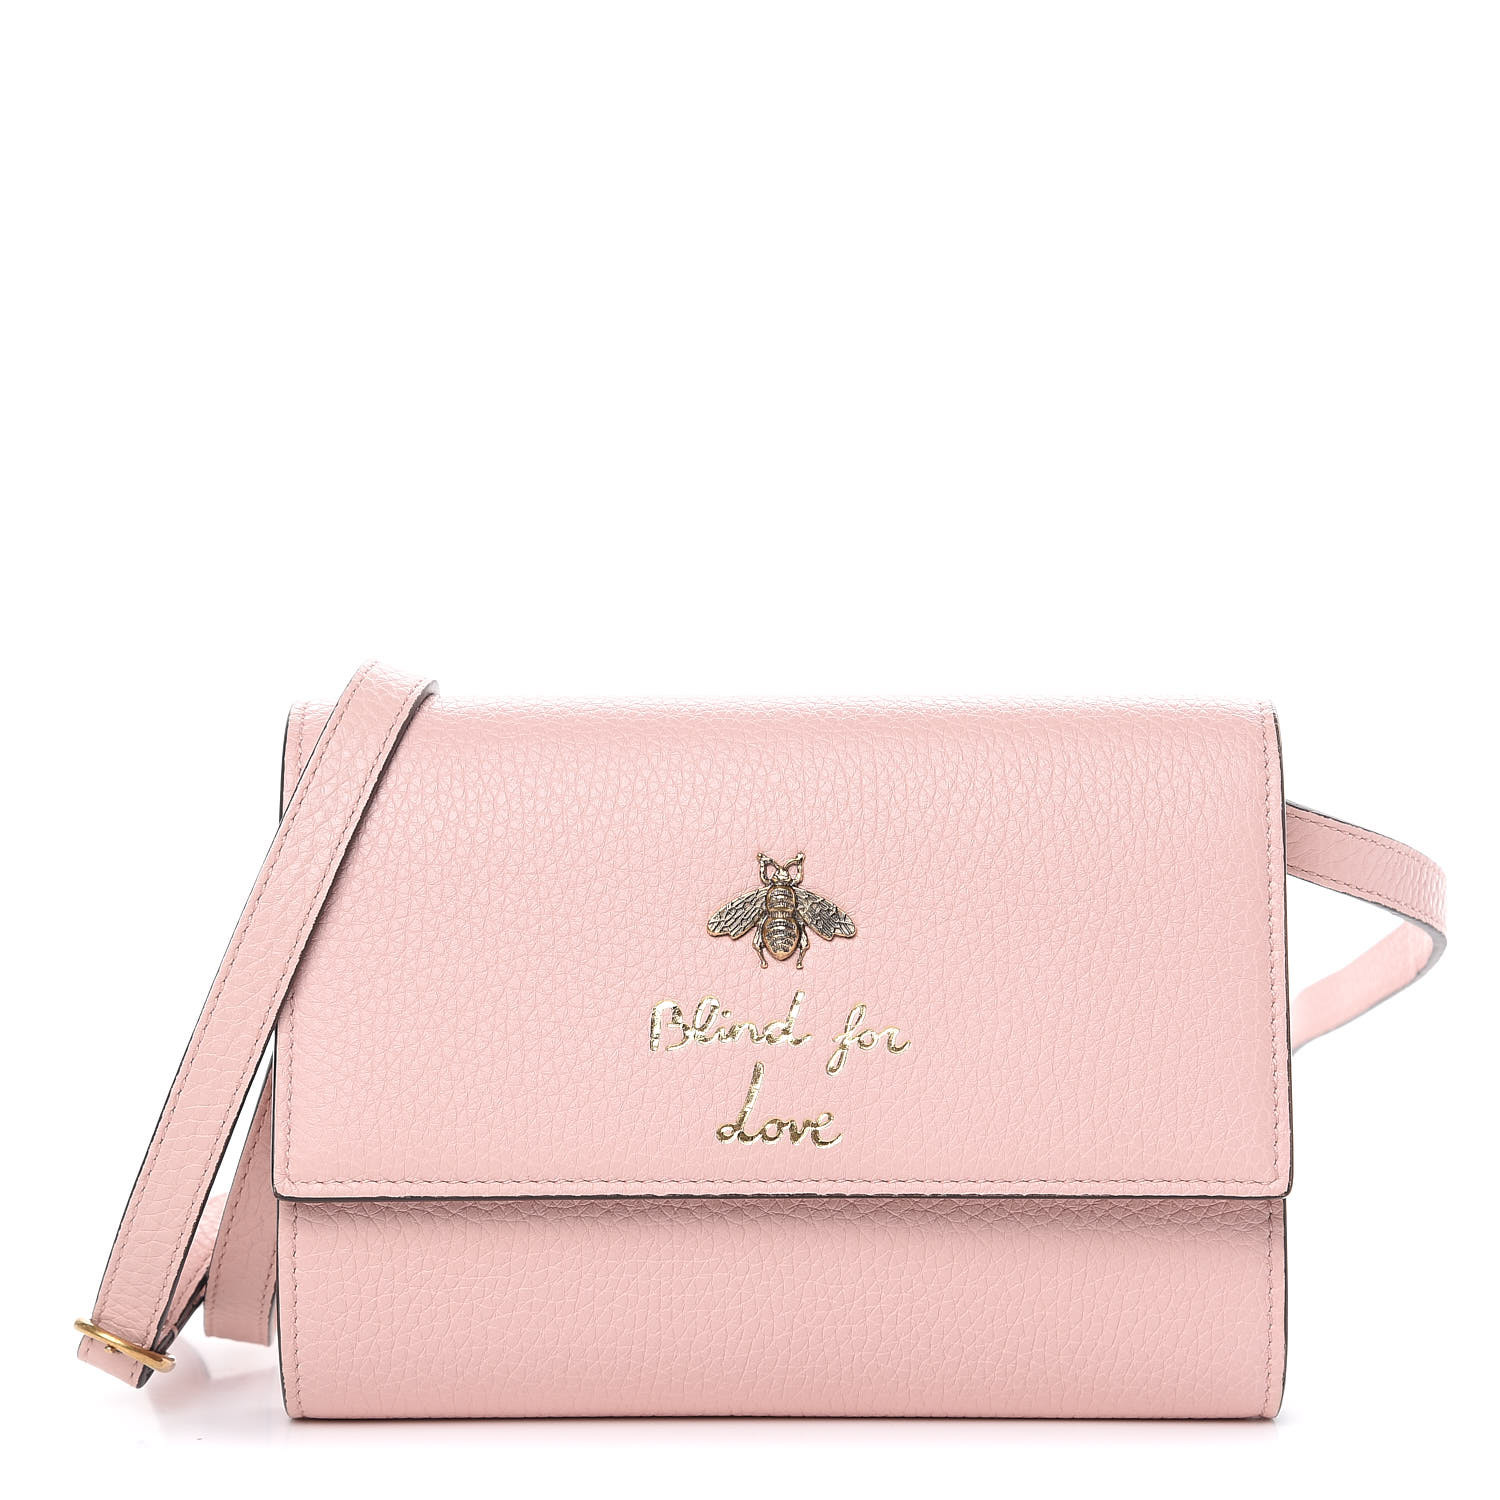 gucci blind for love crossbody